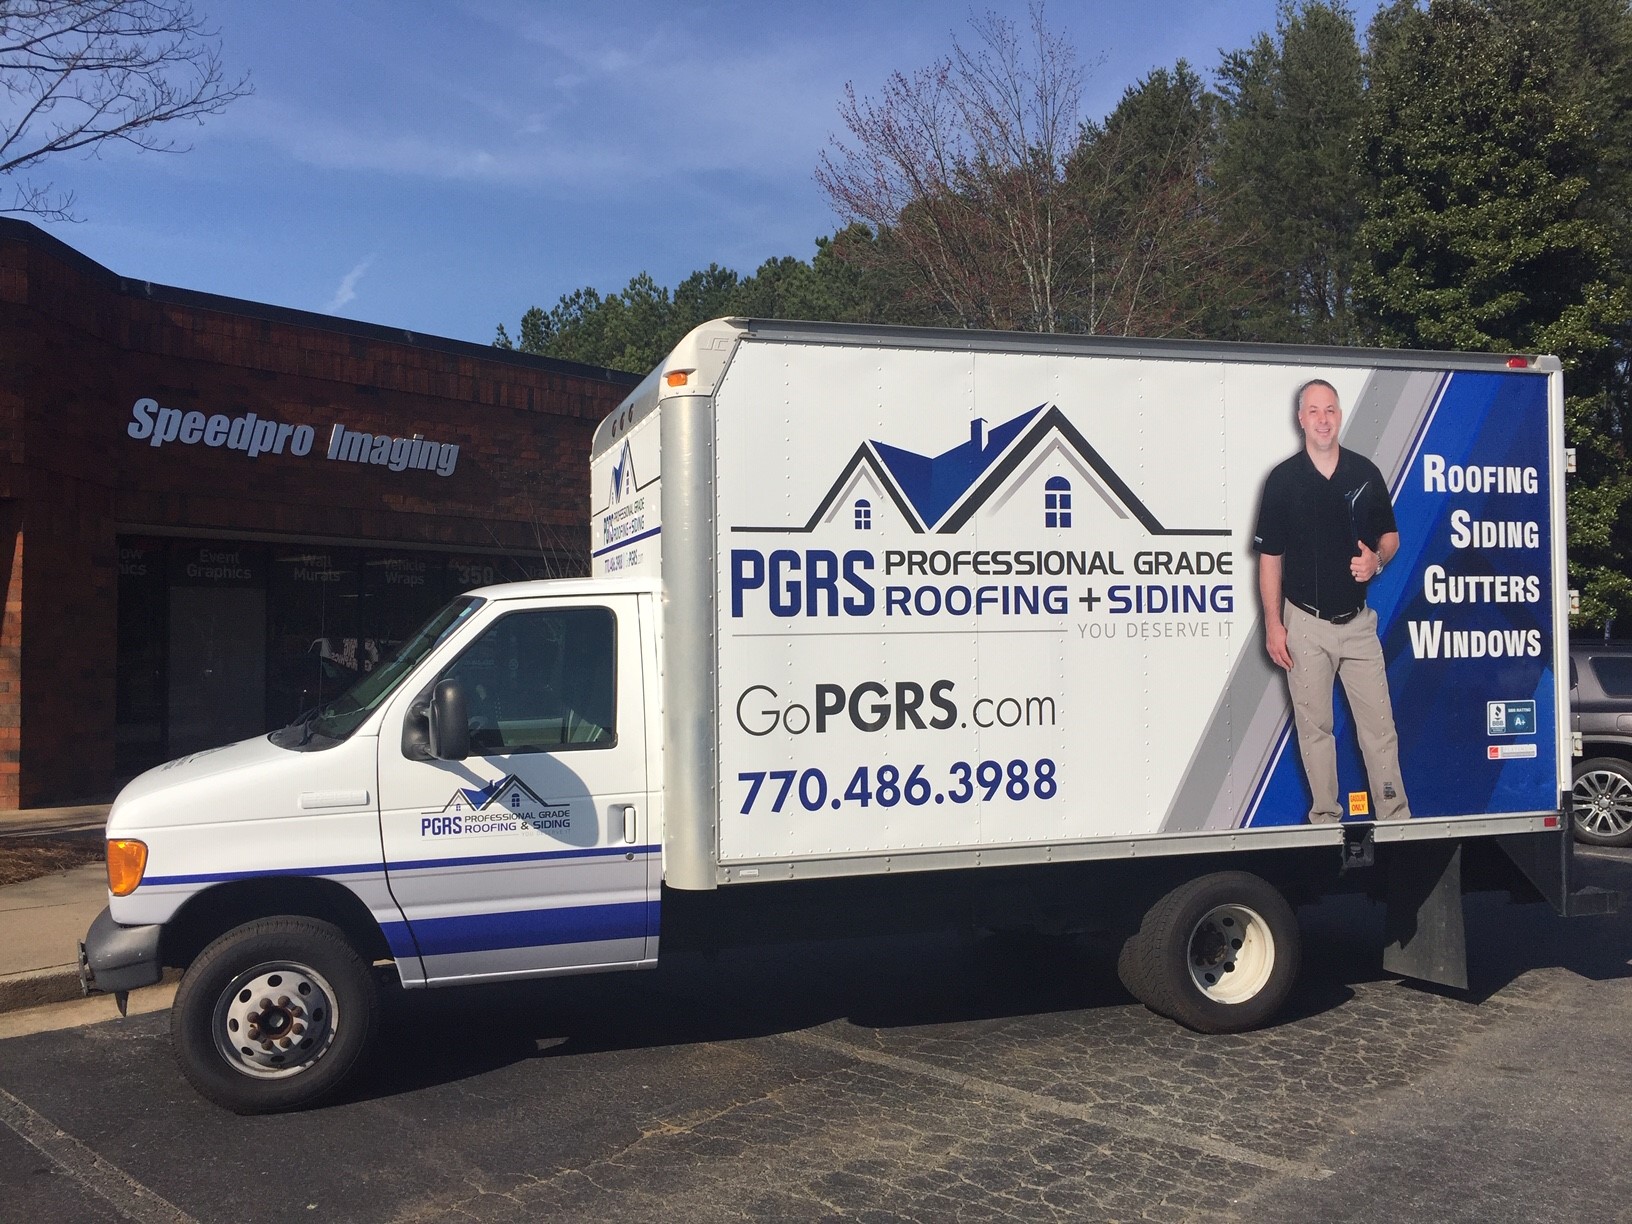 PGRS truck wrap